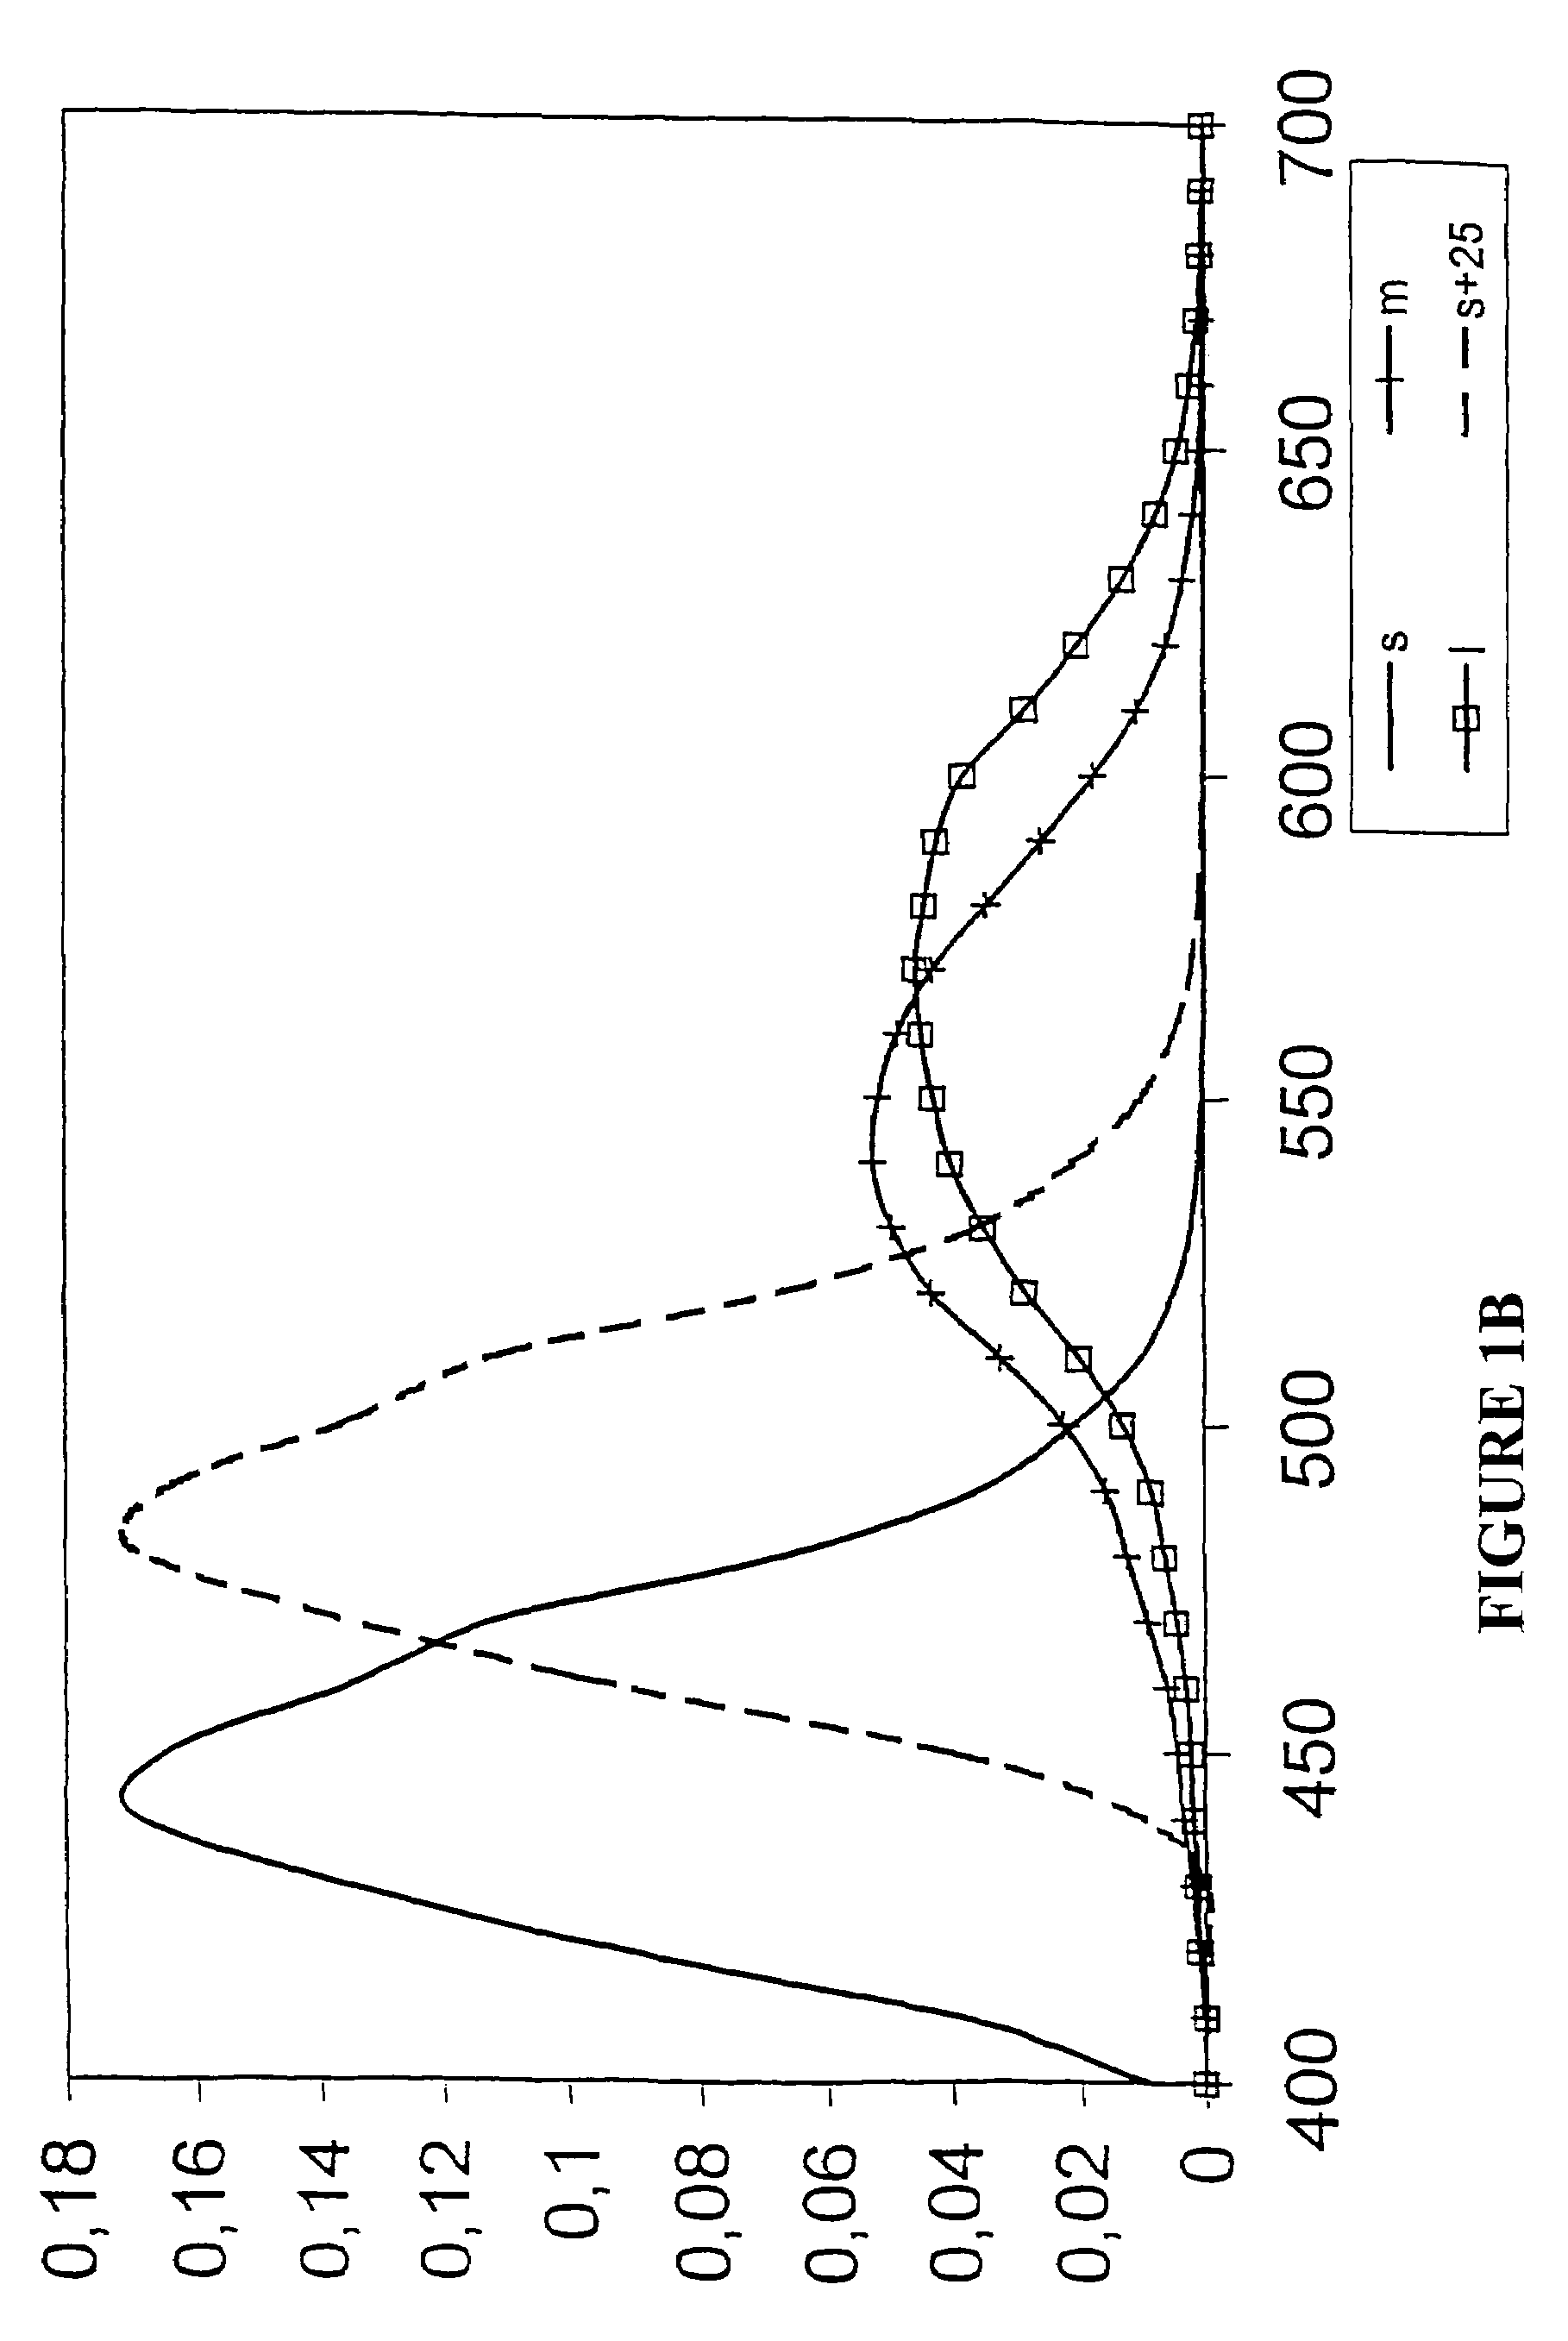 Method for designing color filters which improve or modify color vision of human eye, and color filter means designed by the method